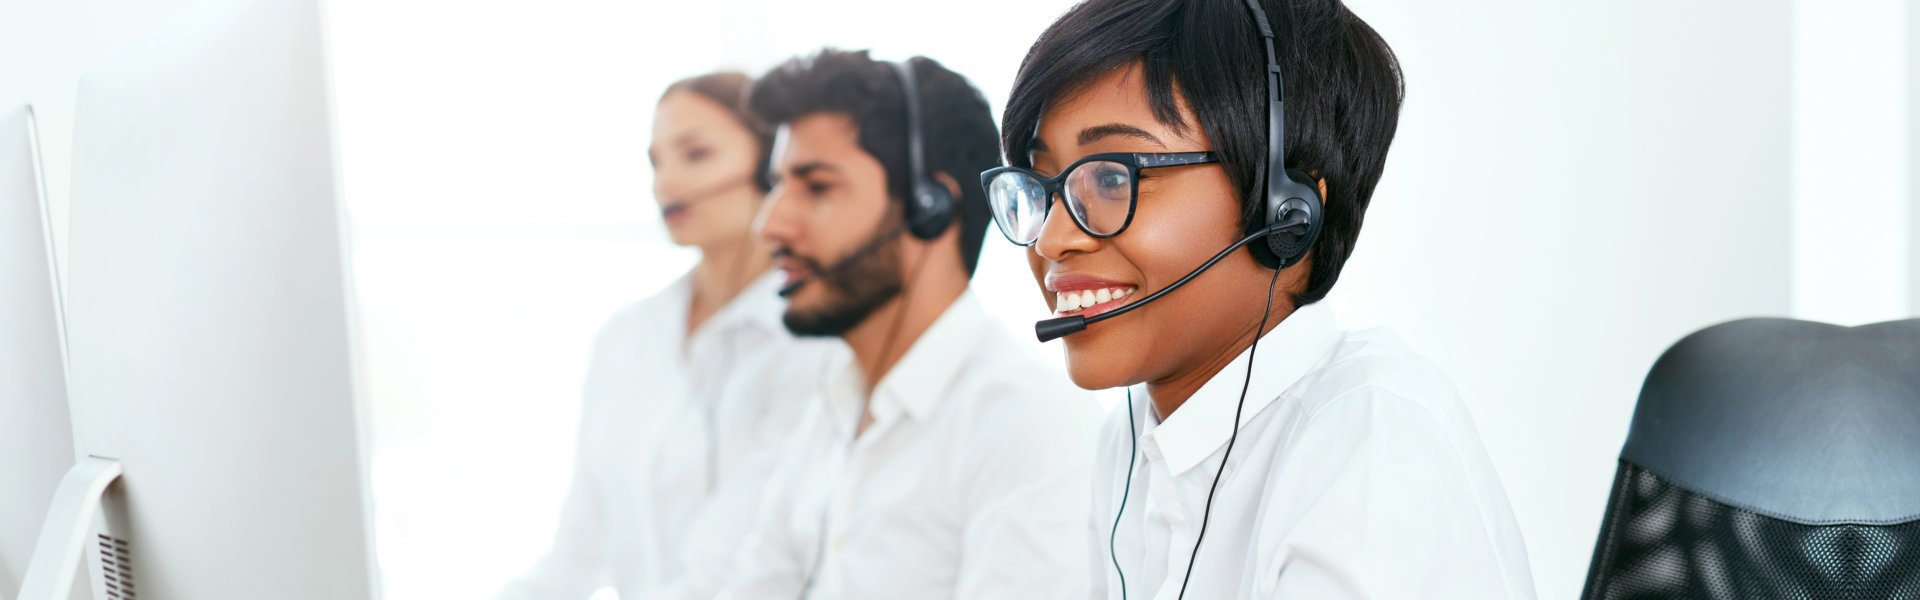 group of people wearing headset